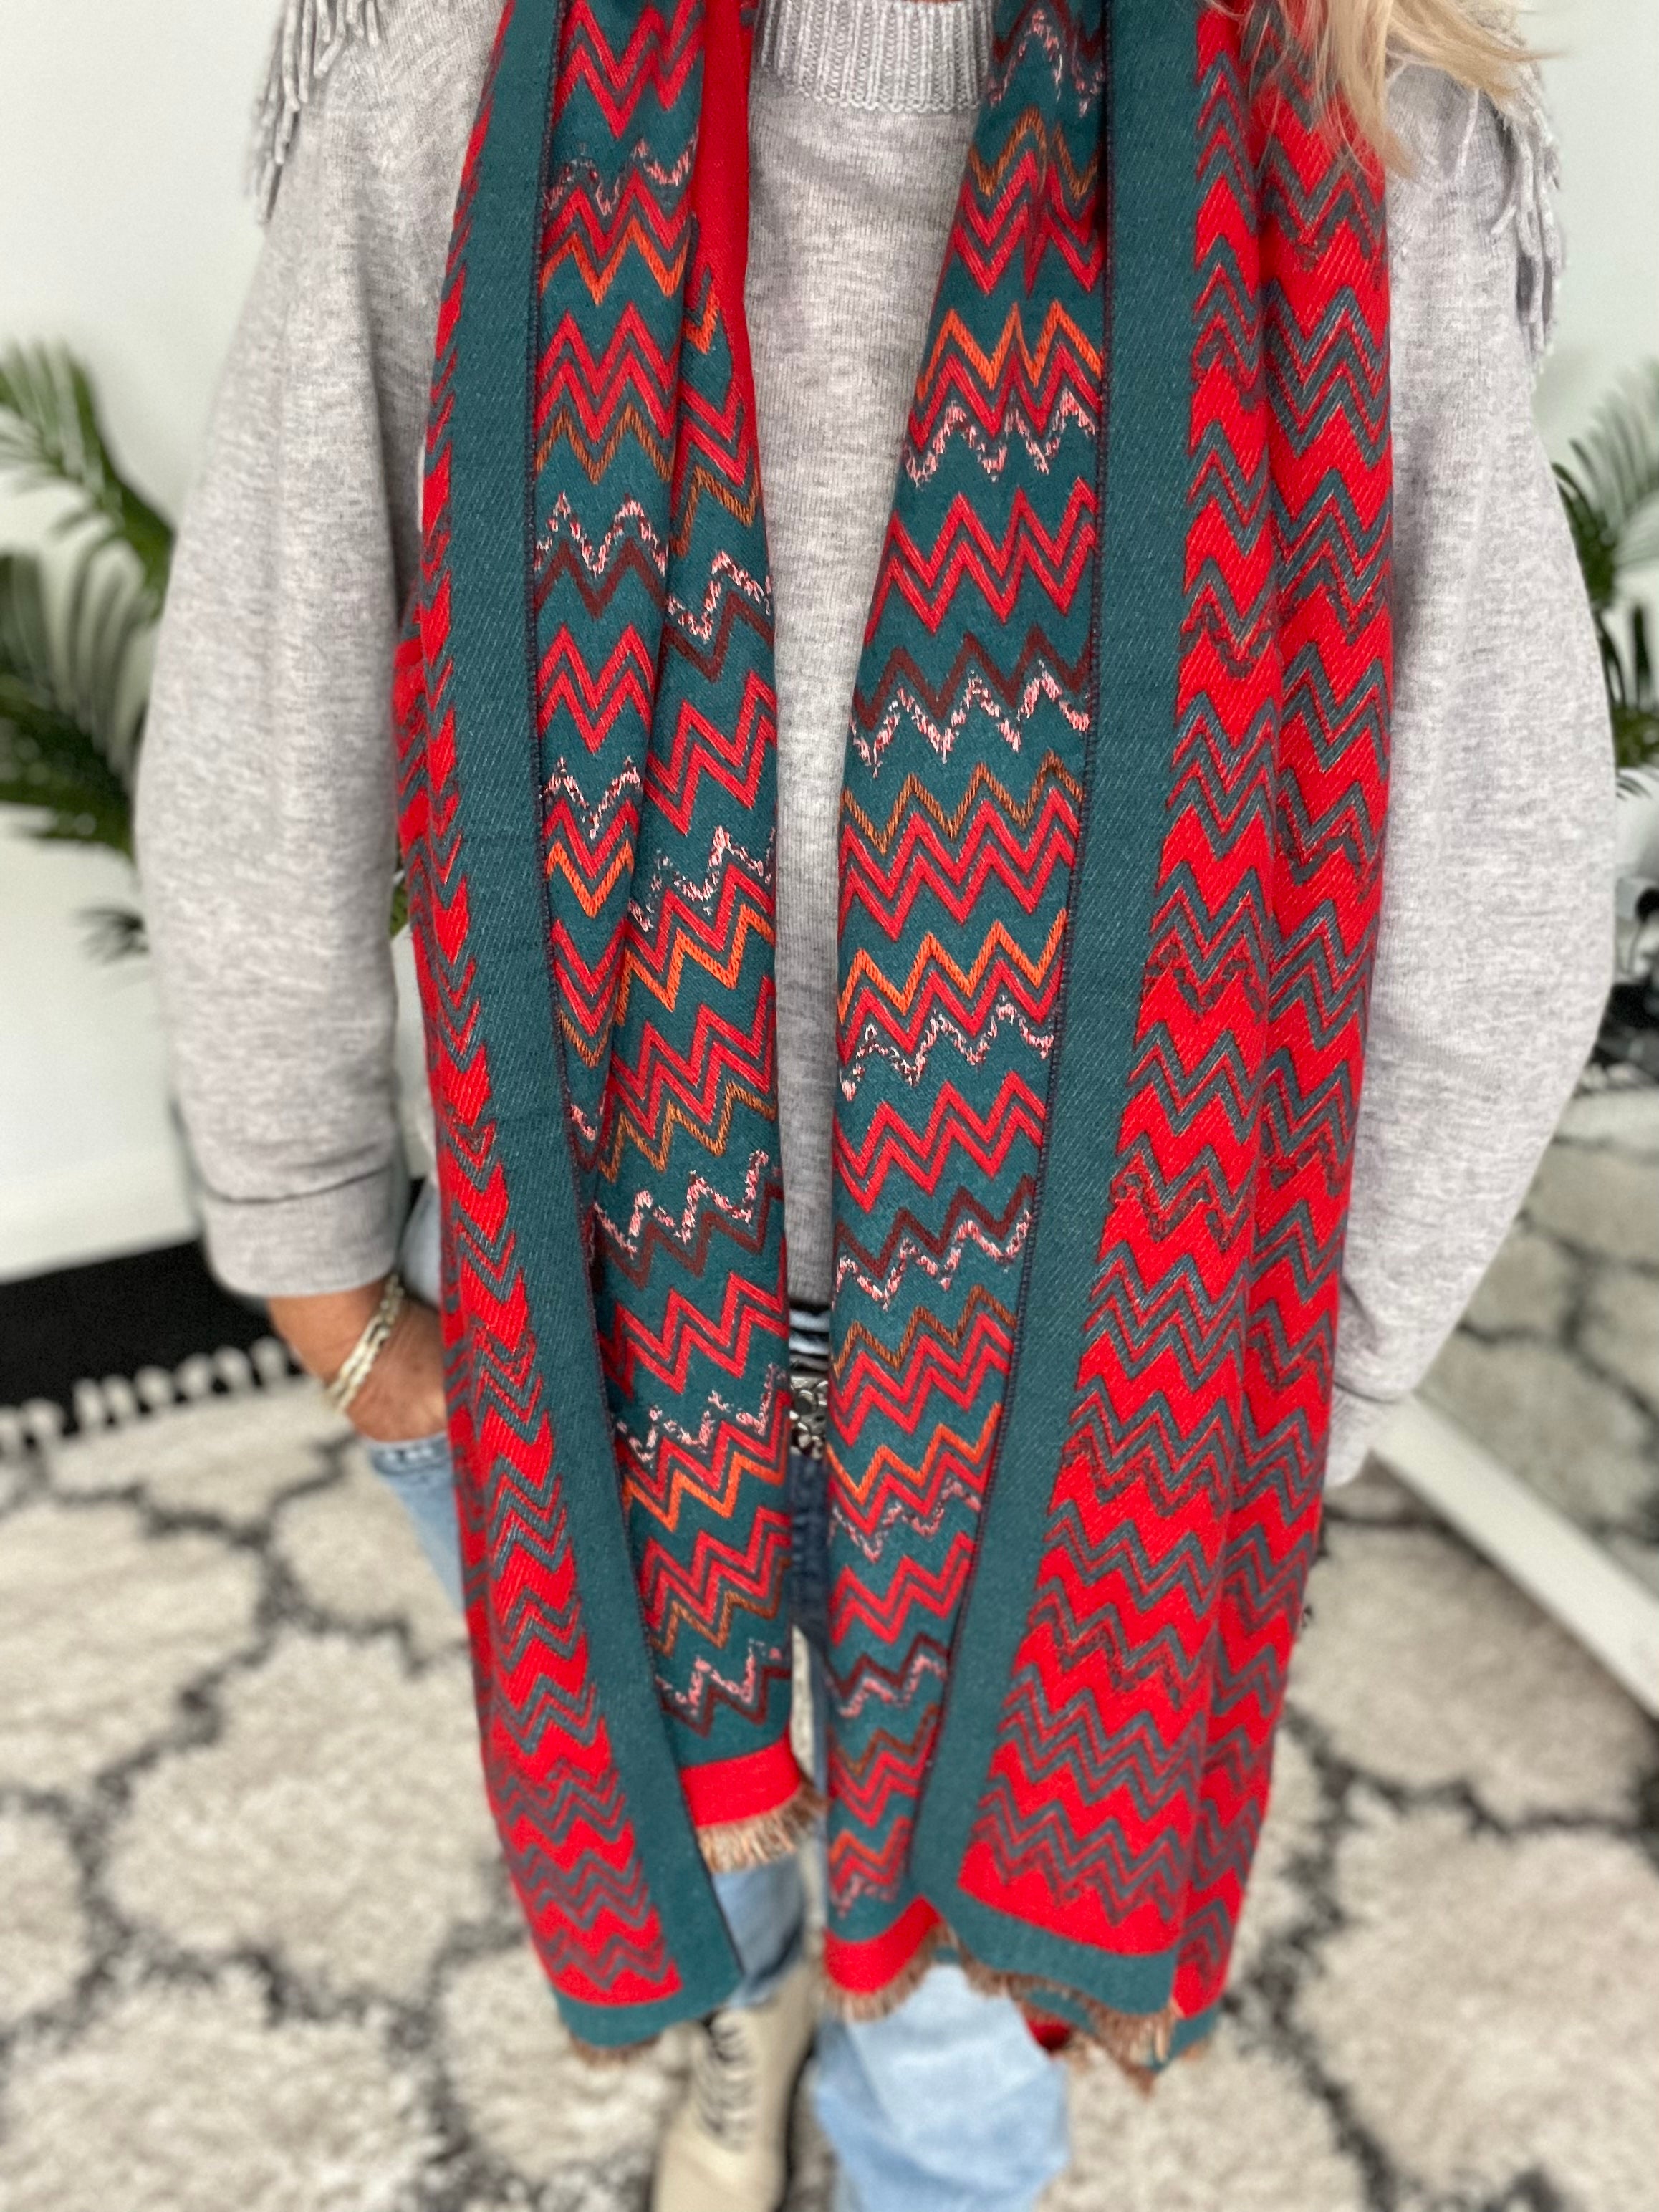 Teal & Red Zig Zag Knitted Scarf